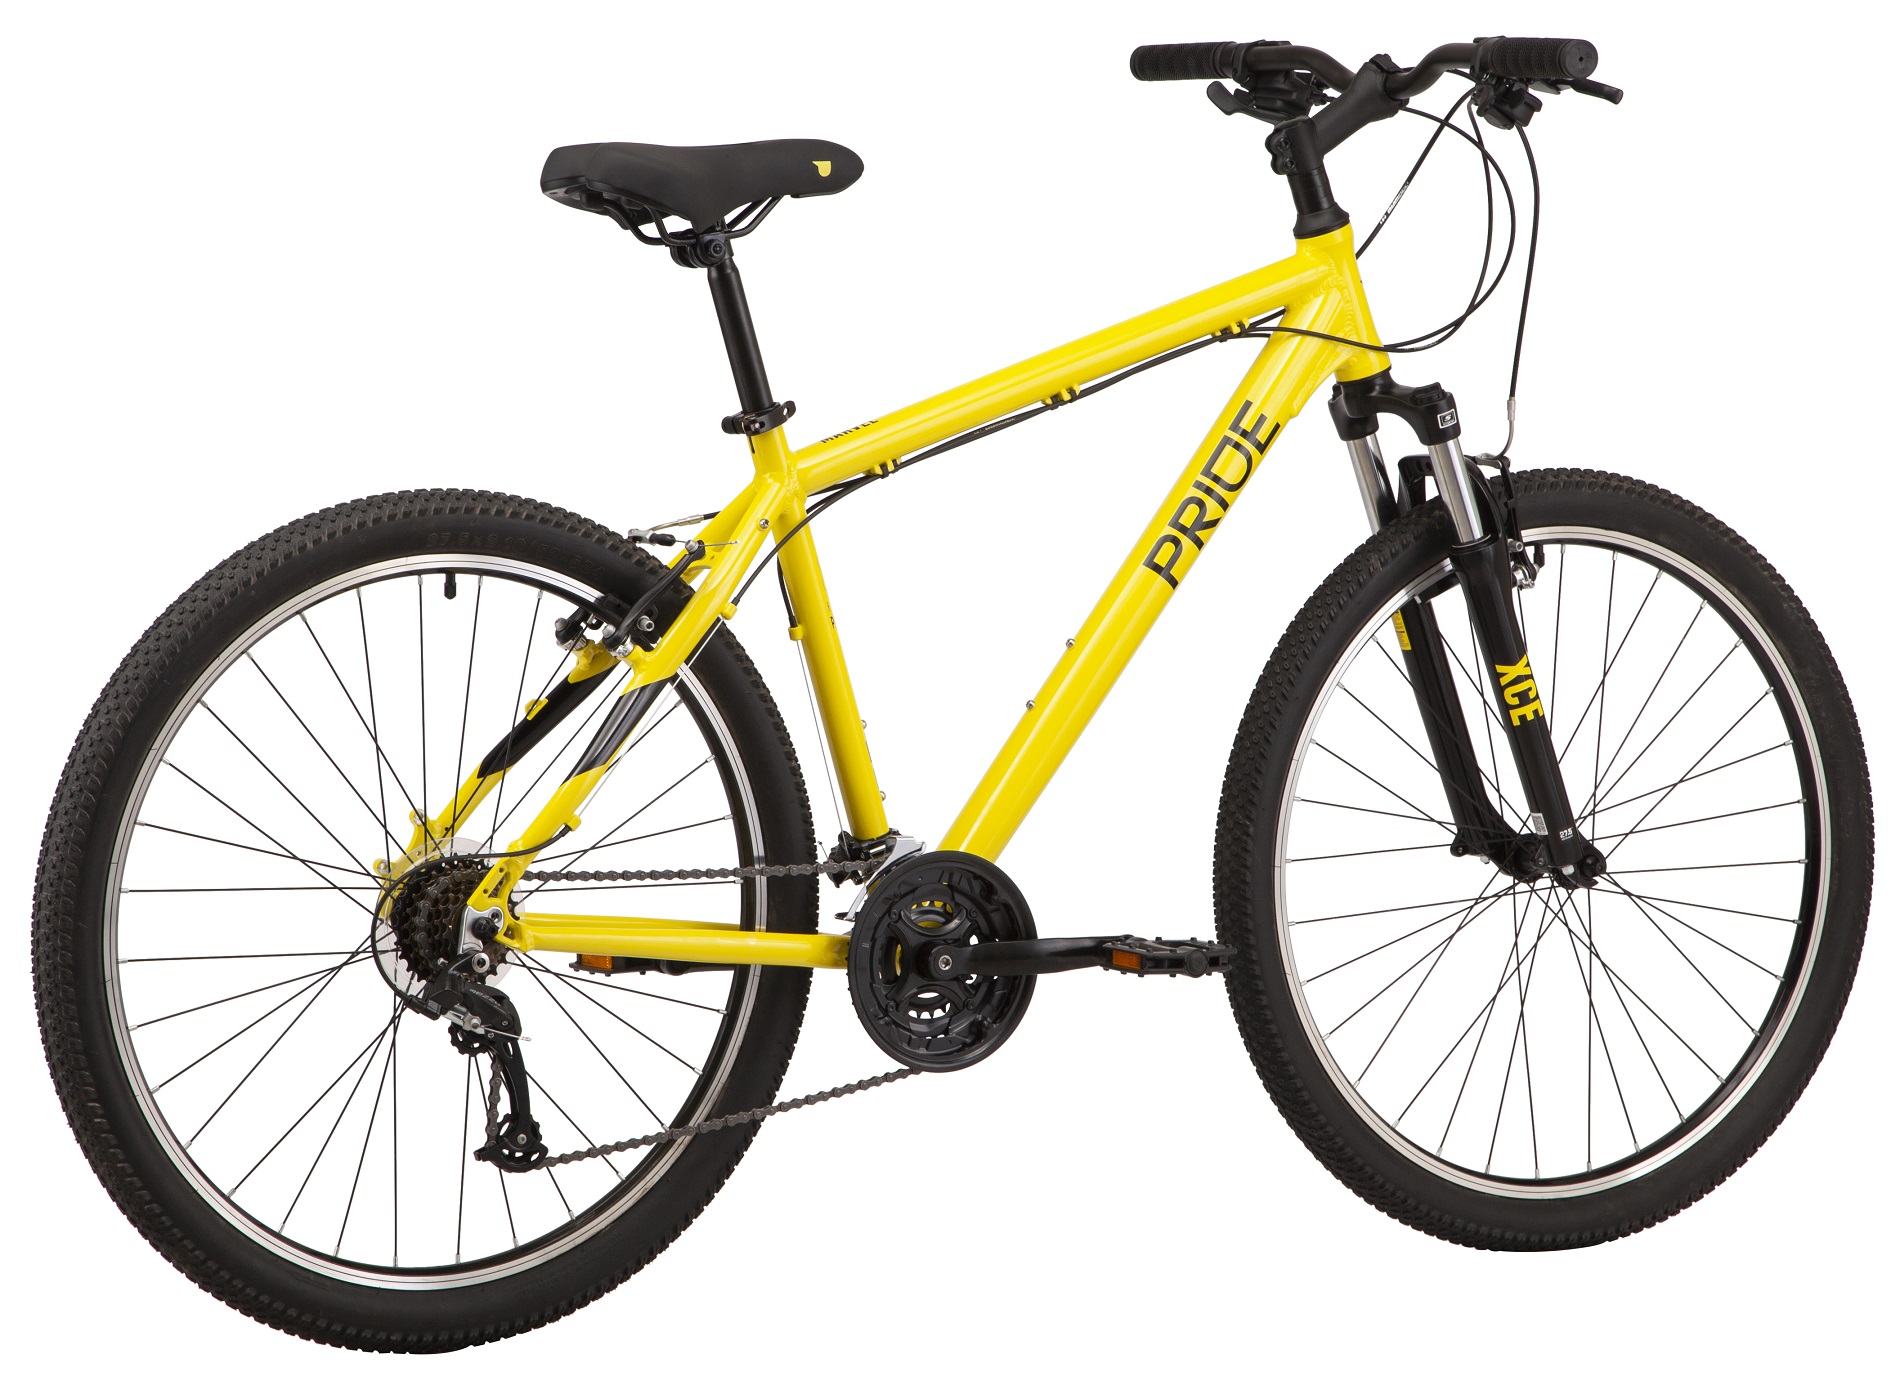 27.5" PRIDE MARVEL 7.1 frame - L 2022 yellow (rear and front switches and tamnet - Microshift) Photo 3